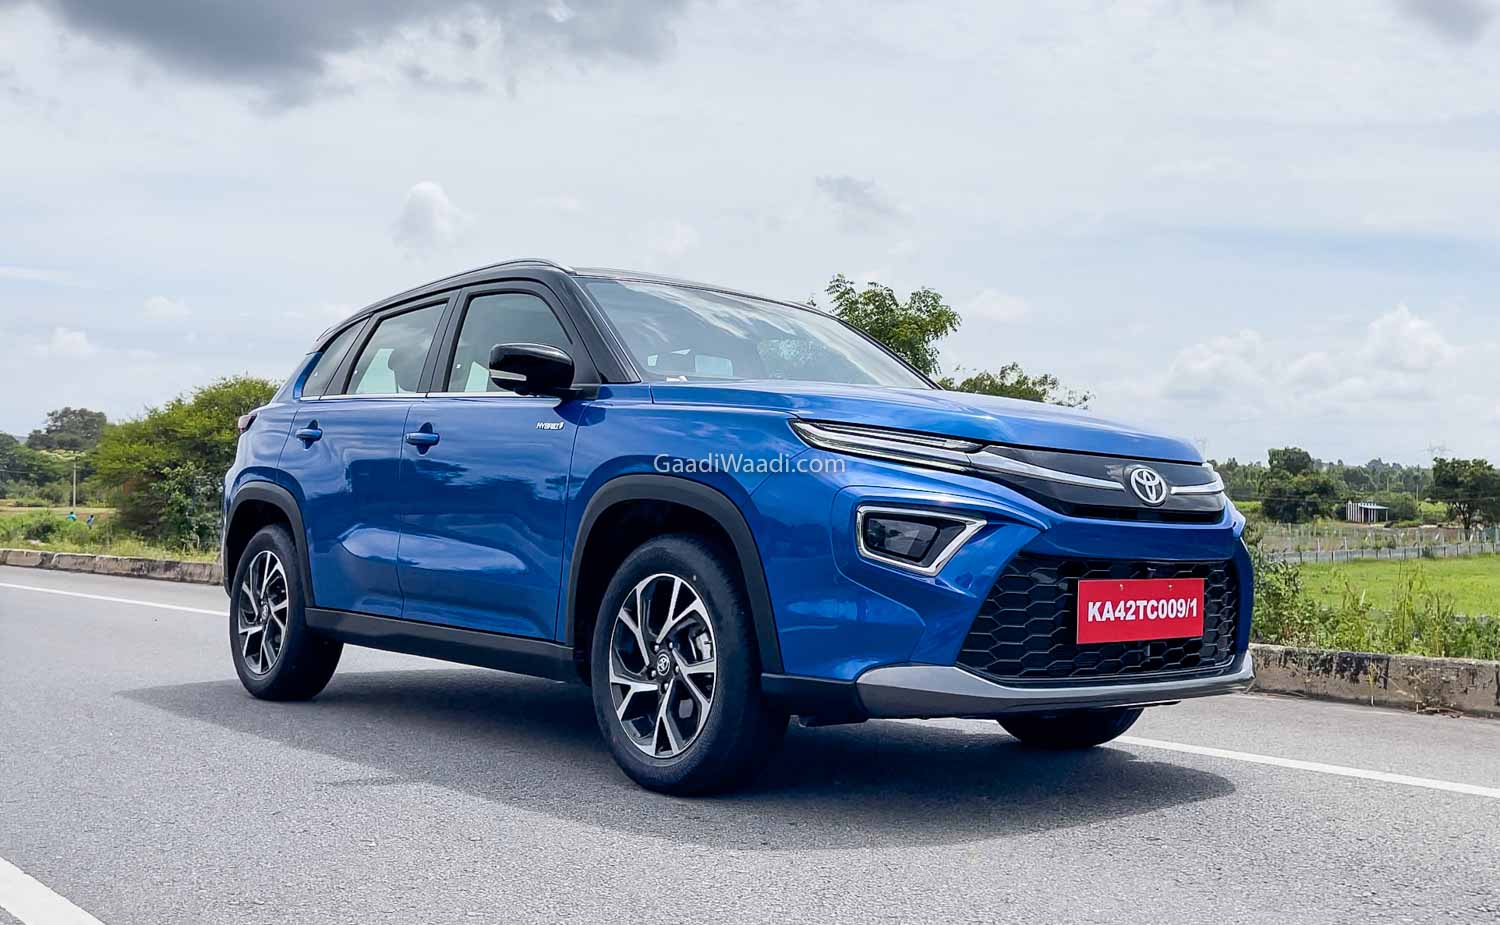 Toyota Hyryder Tone Variants' Prices At Rs. 17.69